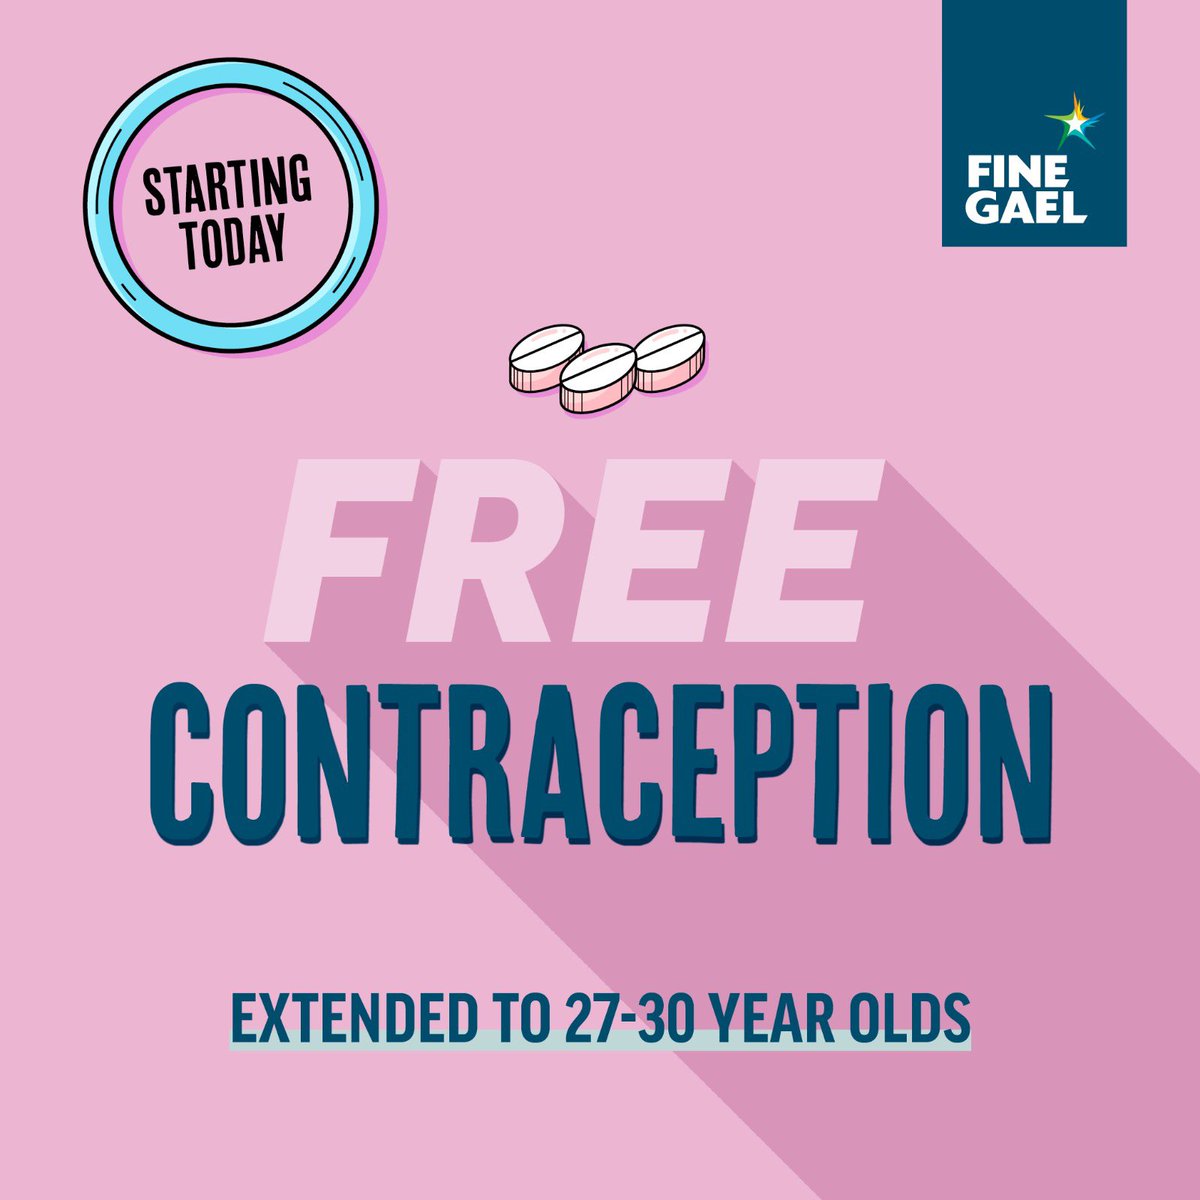 Free contraception is being extended to women aged 27 to 30 years. This is another way Fine Gael is helping with the cost of living and putting money back in your pocket.